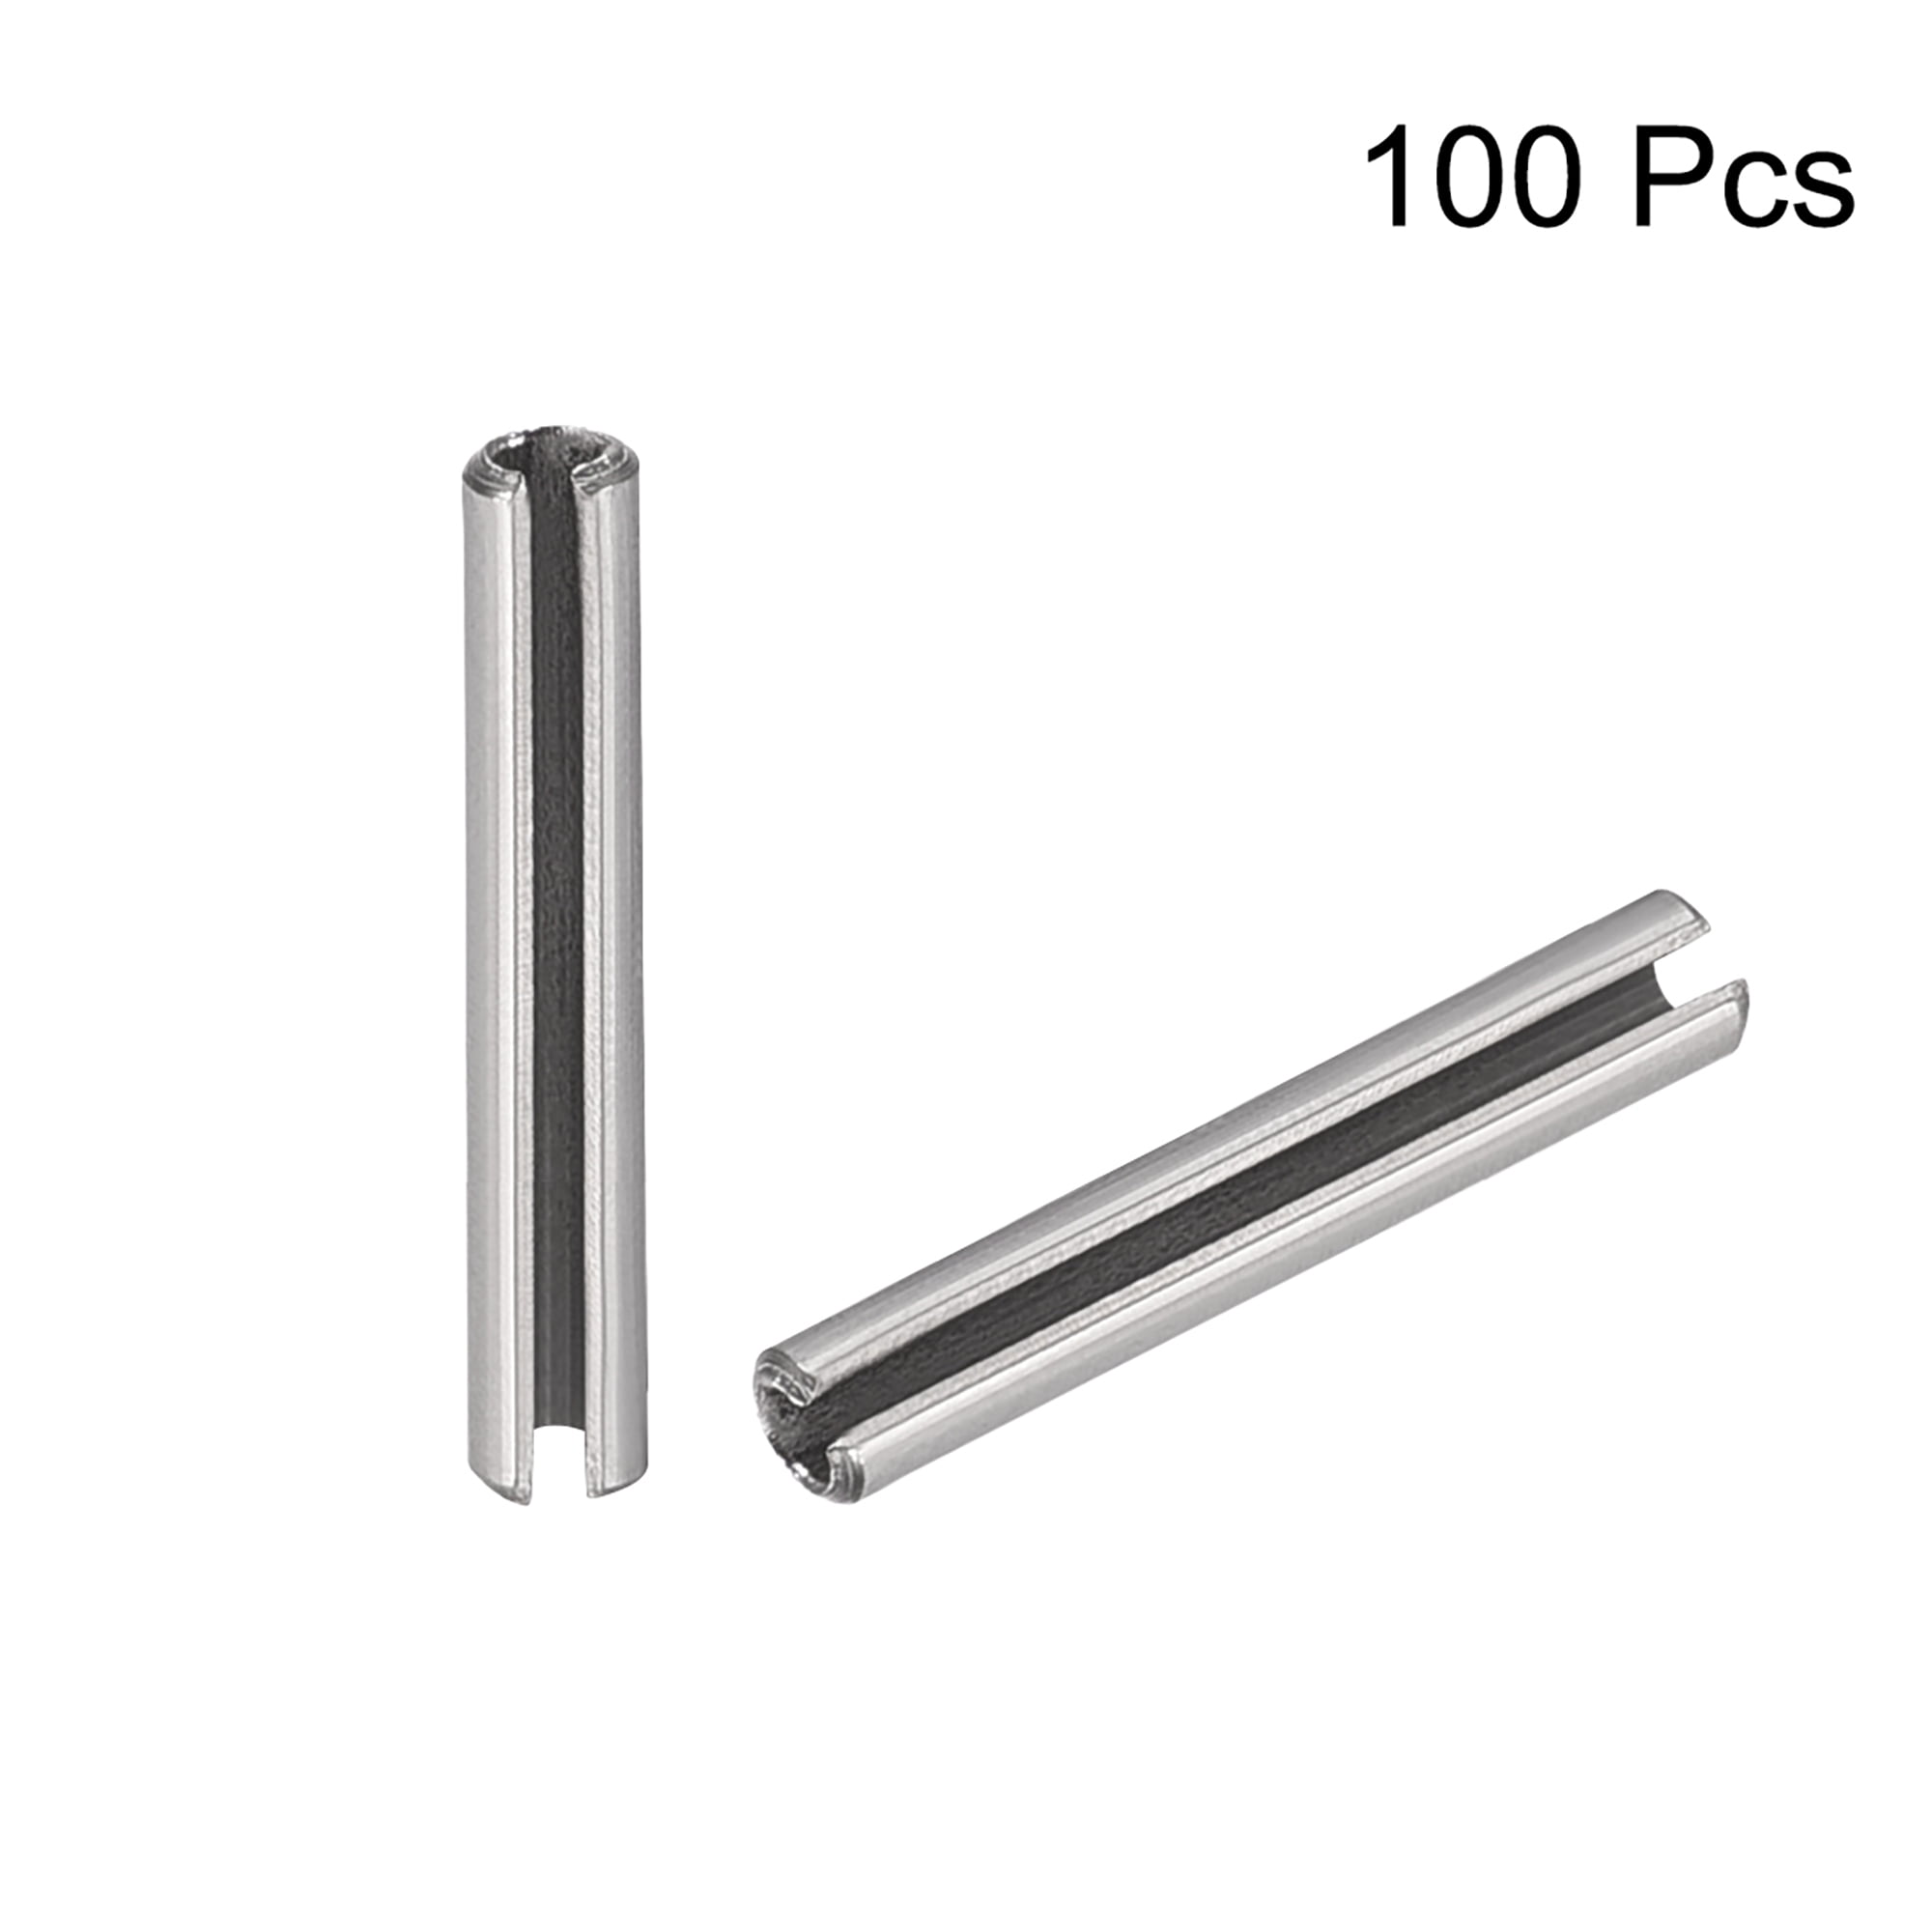 Slotted Roll Spring Pin 3/16" Dia x 1 7/8" Length 50 pcs 420 Stainless Steel 